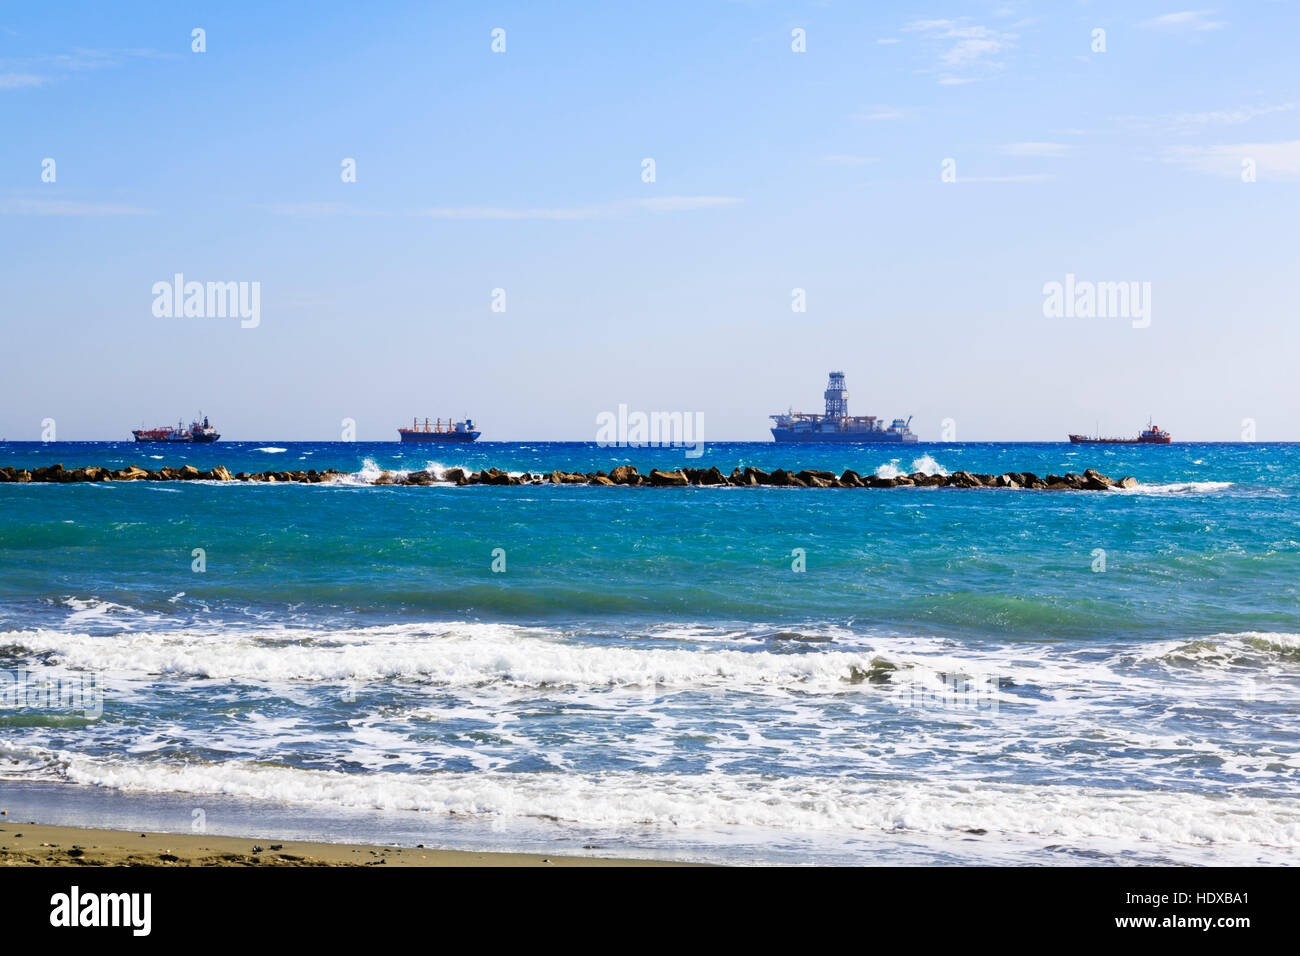 Frieghters and commercial shipping laying at anchor off the coast of Limassol, Cyprus. Stock Photo